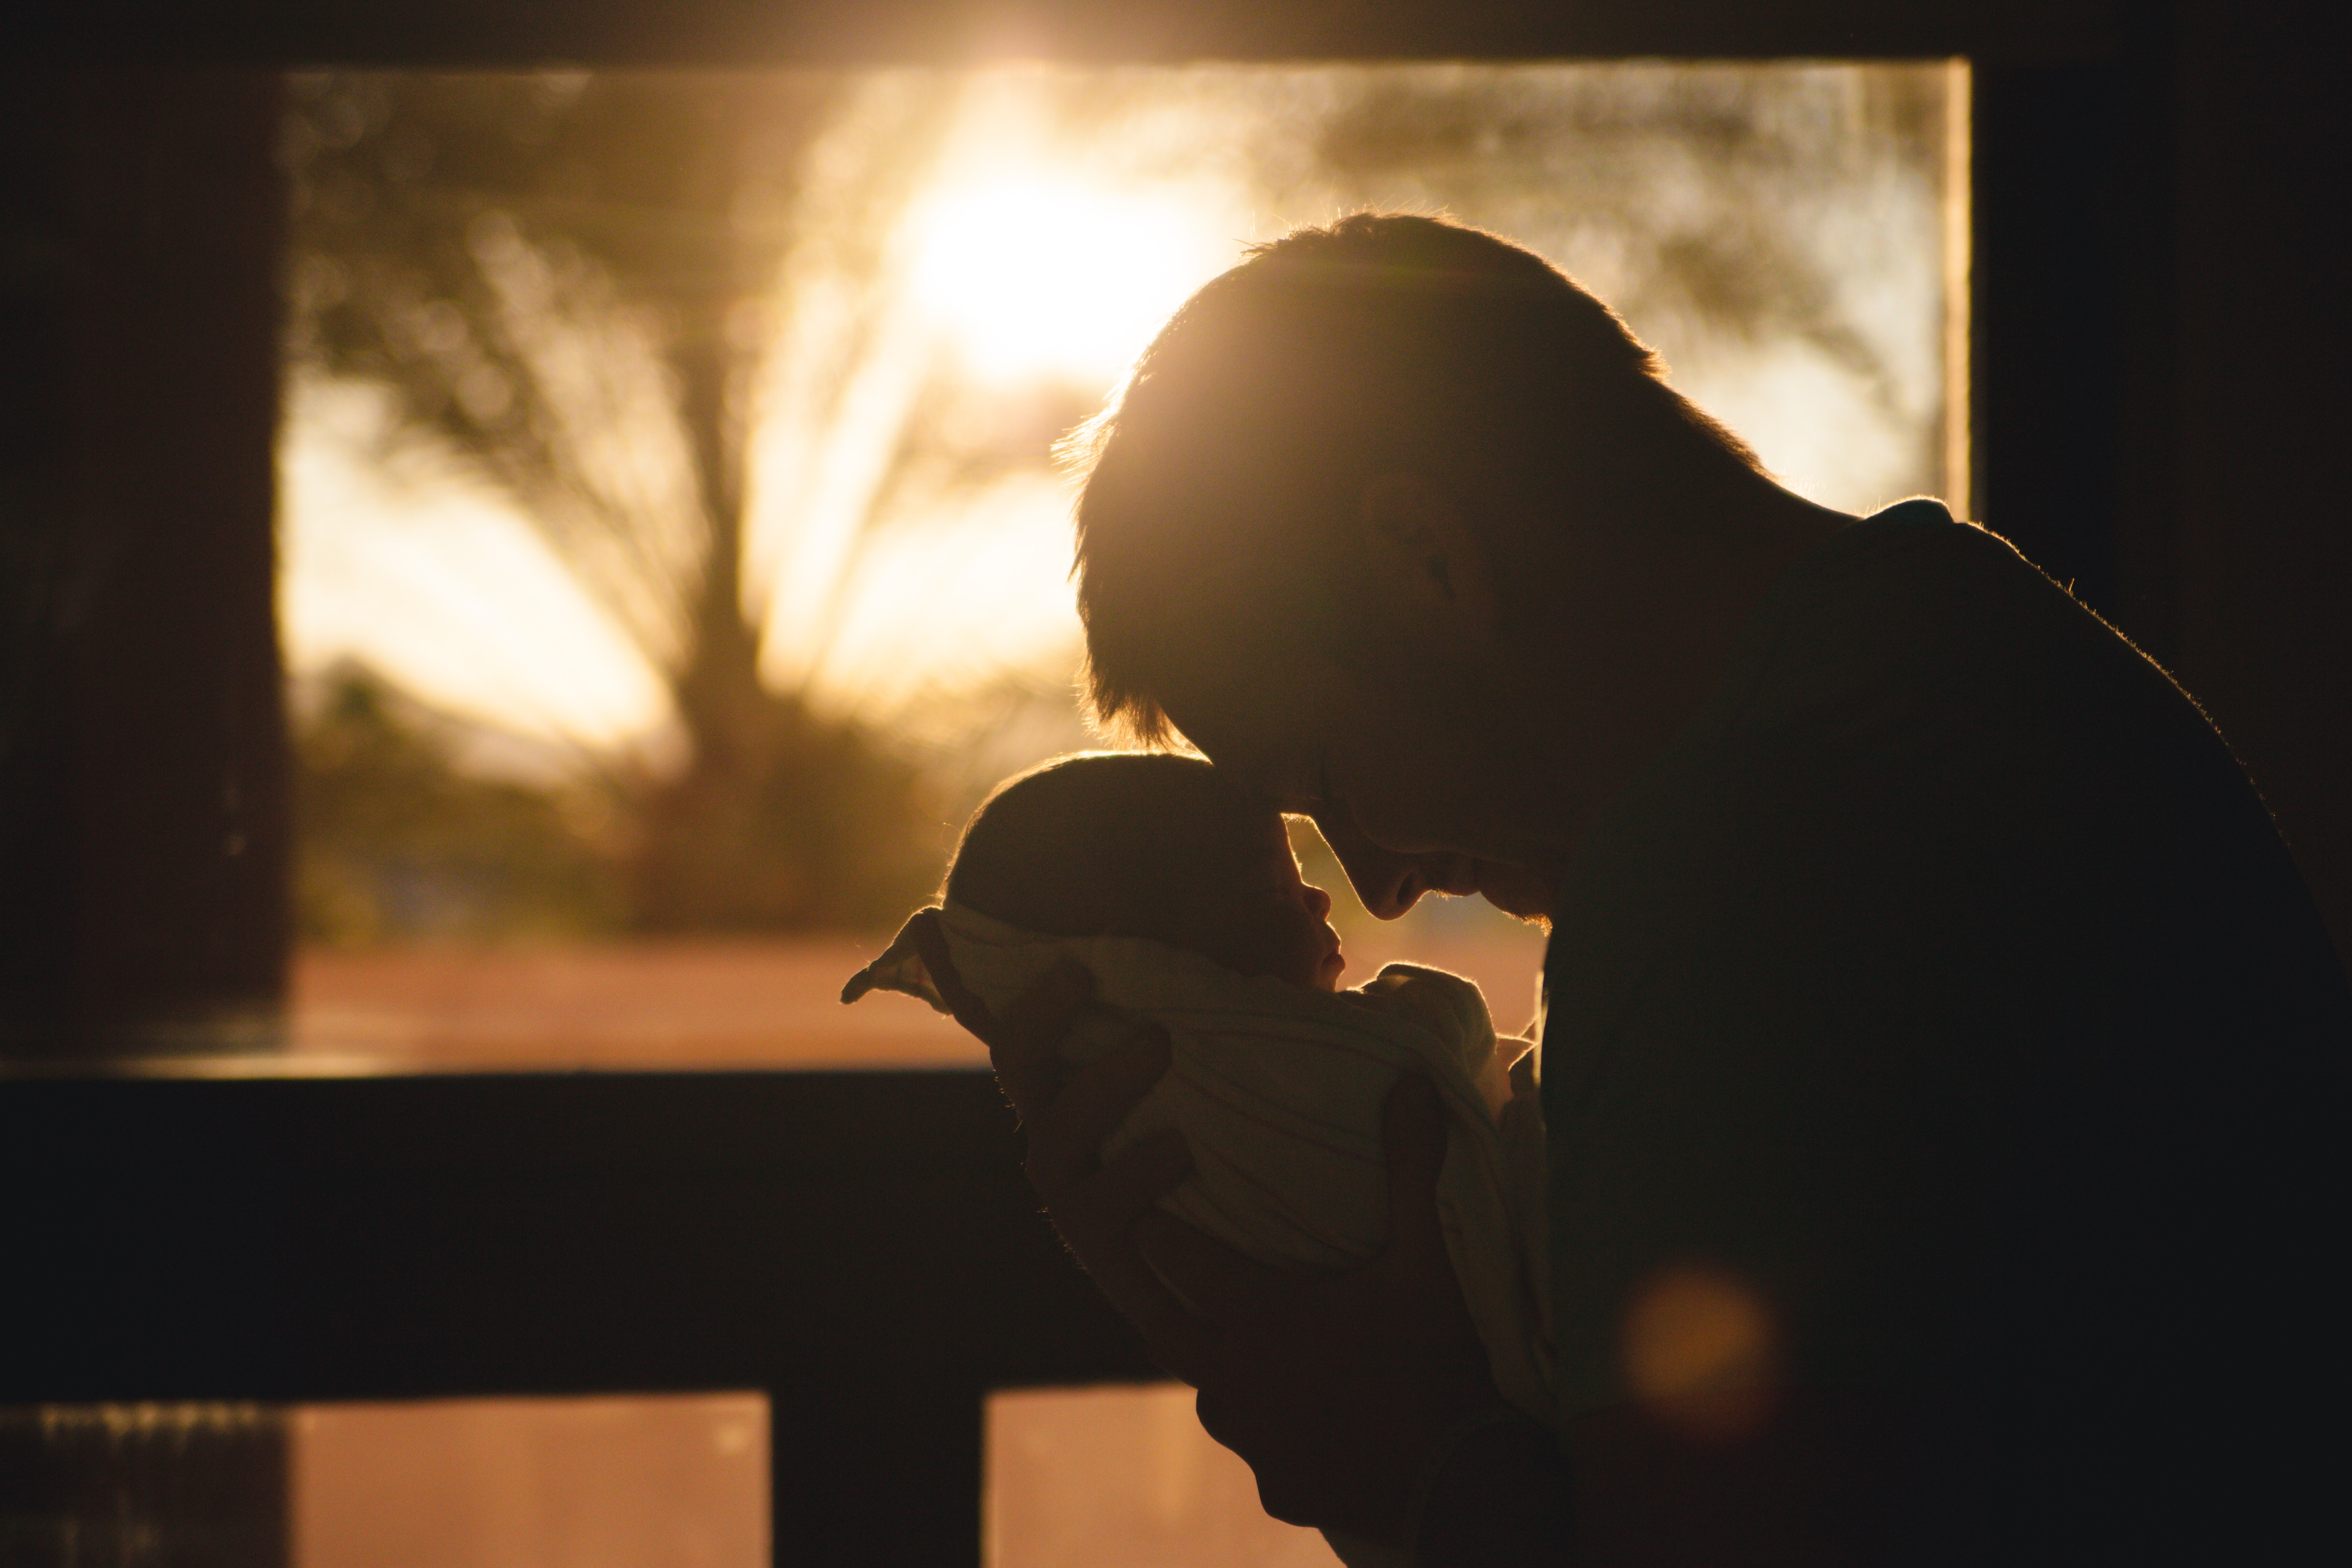 Man holding a baby | Source: Pexels